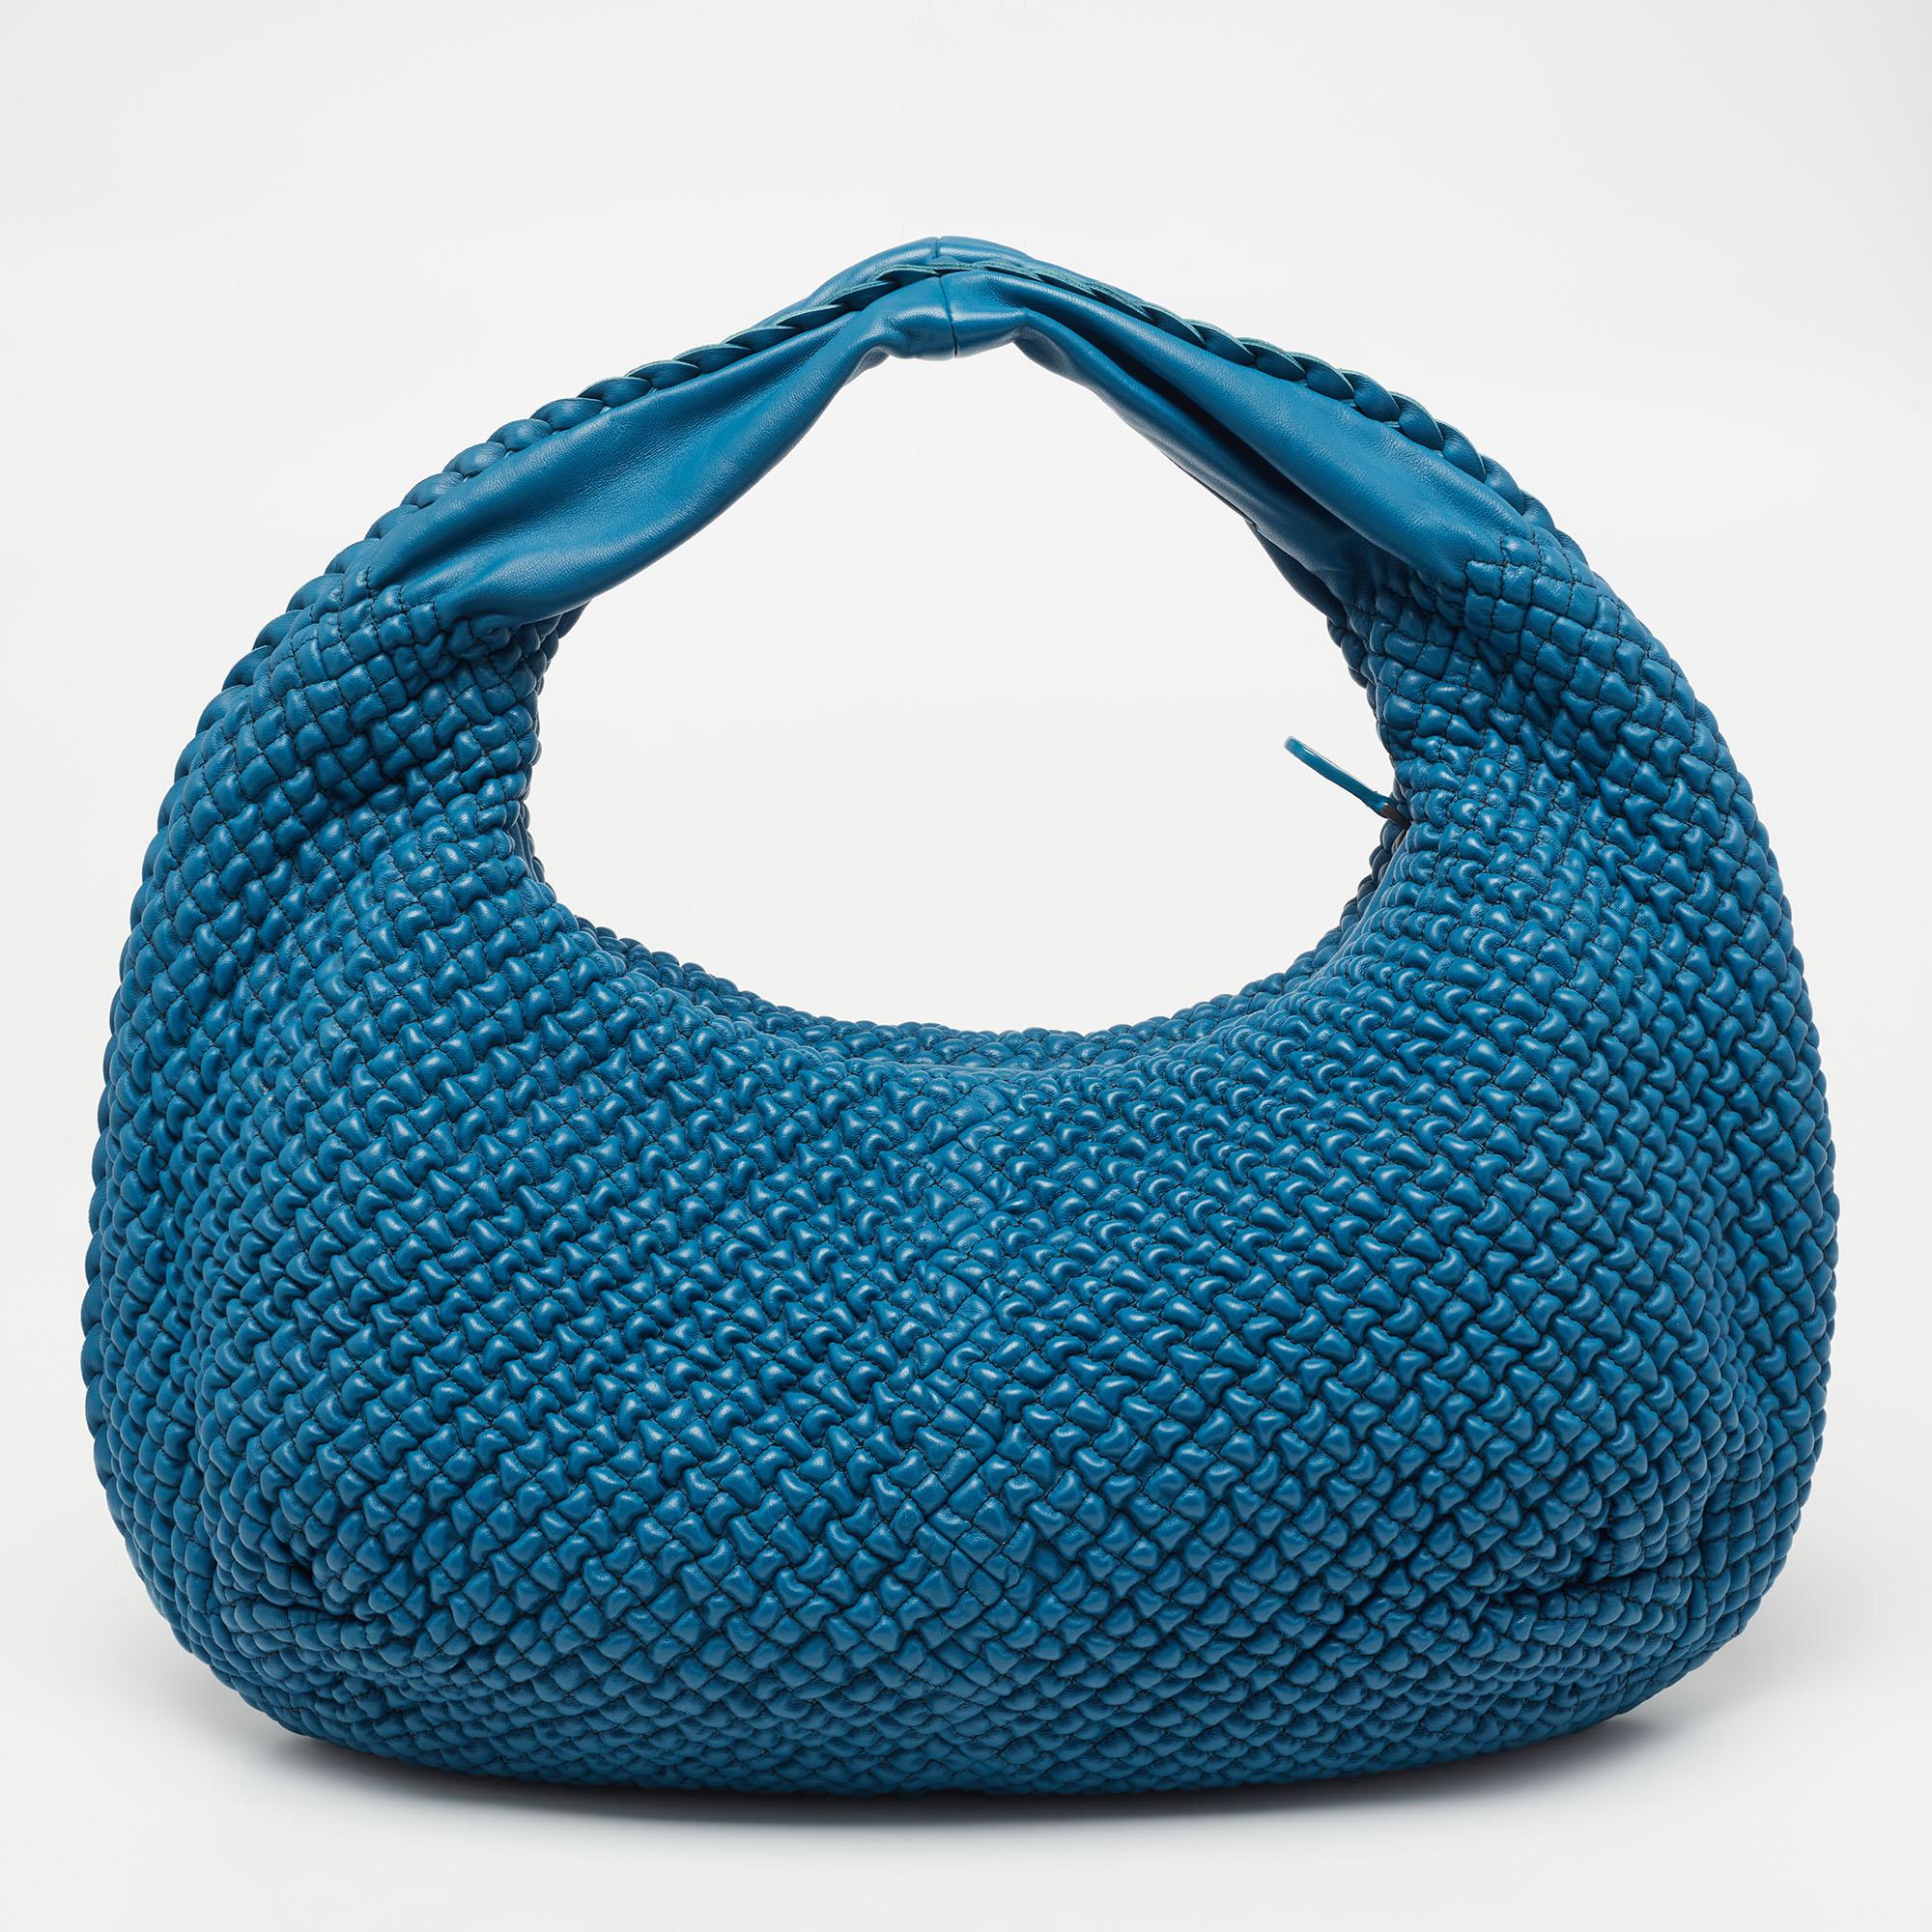 The excellent craftsmanship of this Bottega Veneta hobo ensures a brilliant finish and a rich appeal. Fashioned in bubble-quilted leather, the blue-hued bag is provided with minimal hardware. It features a comfortable handle and a top zip closure,